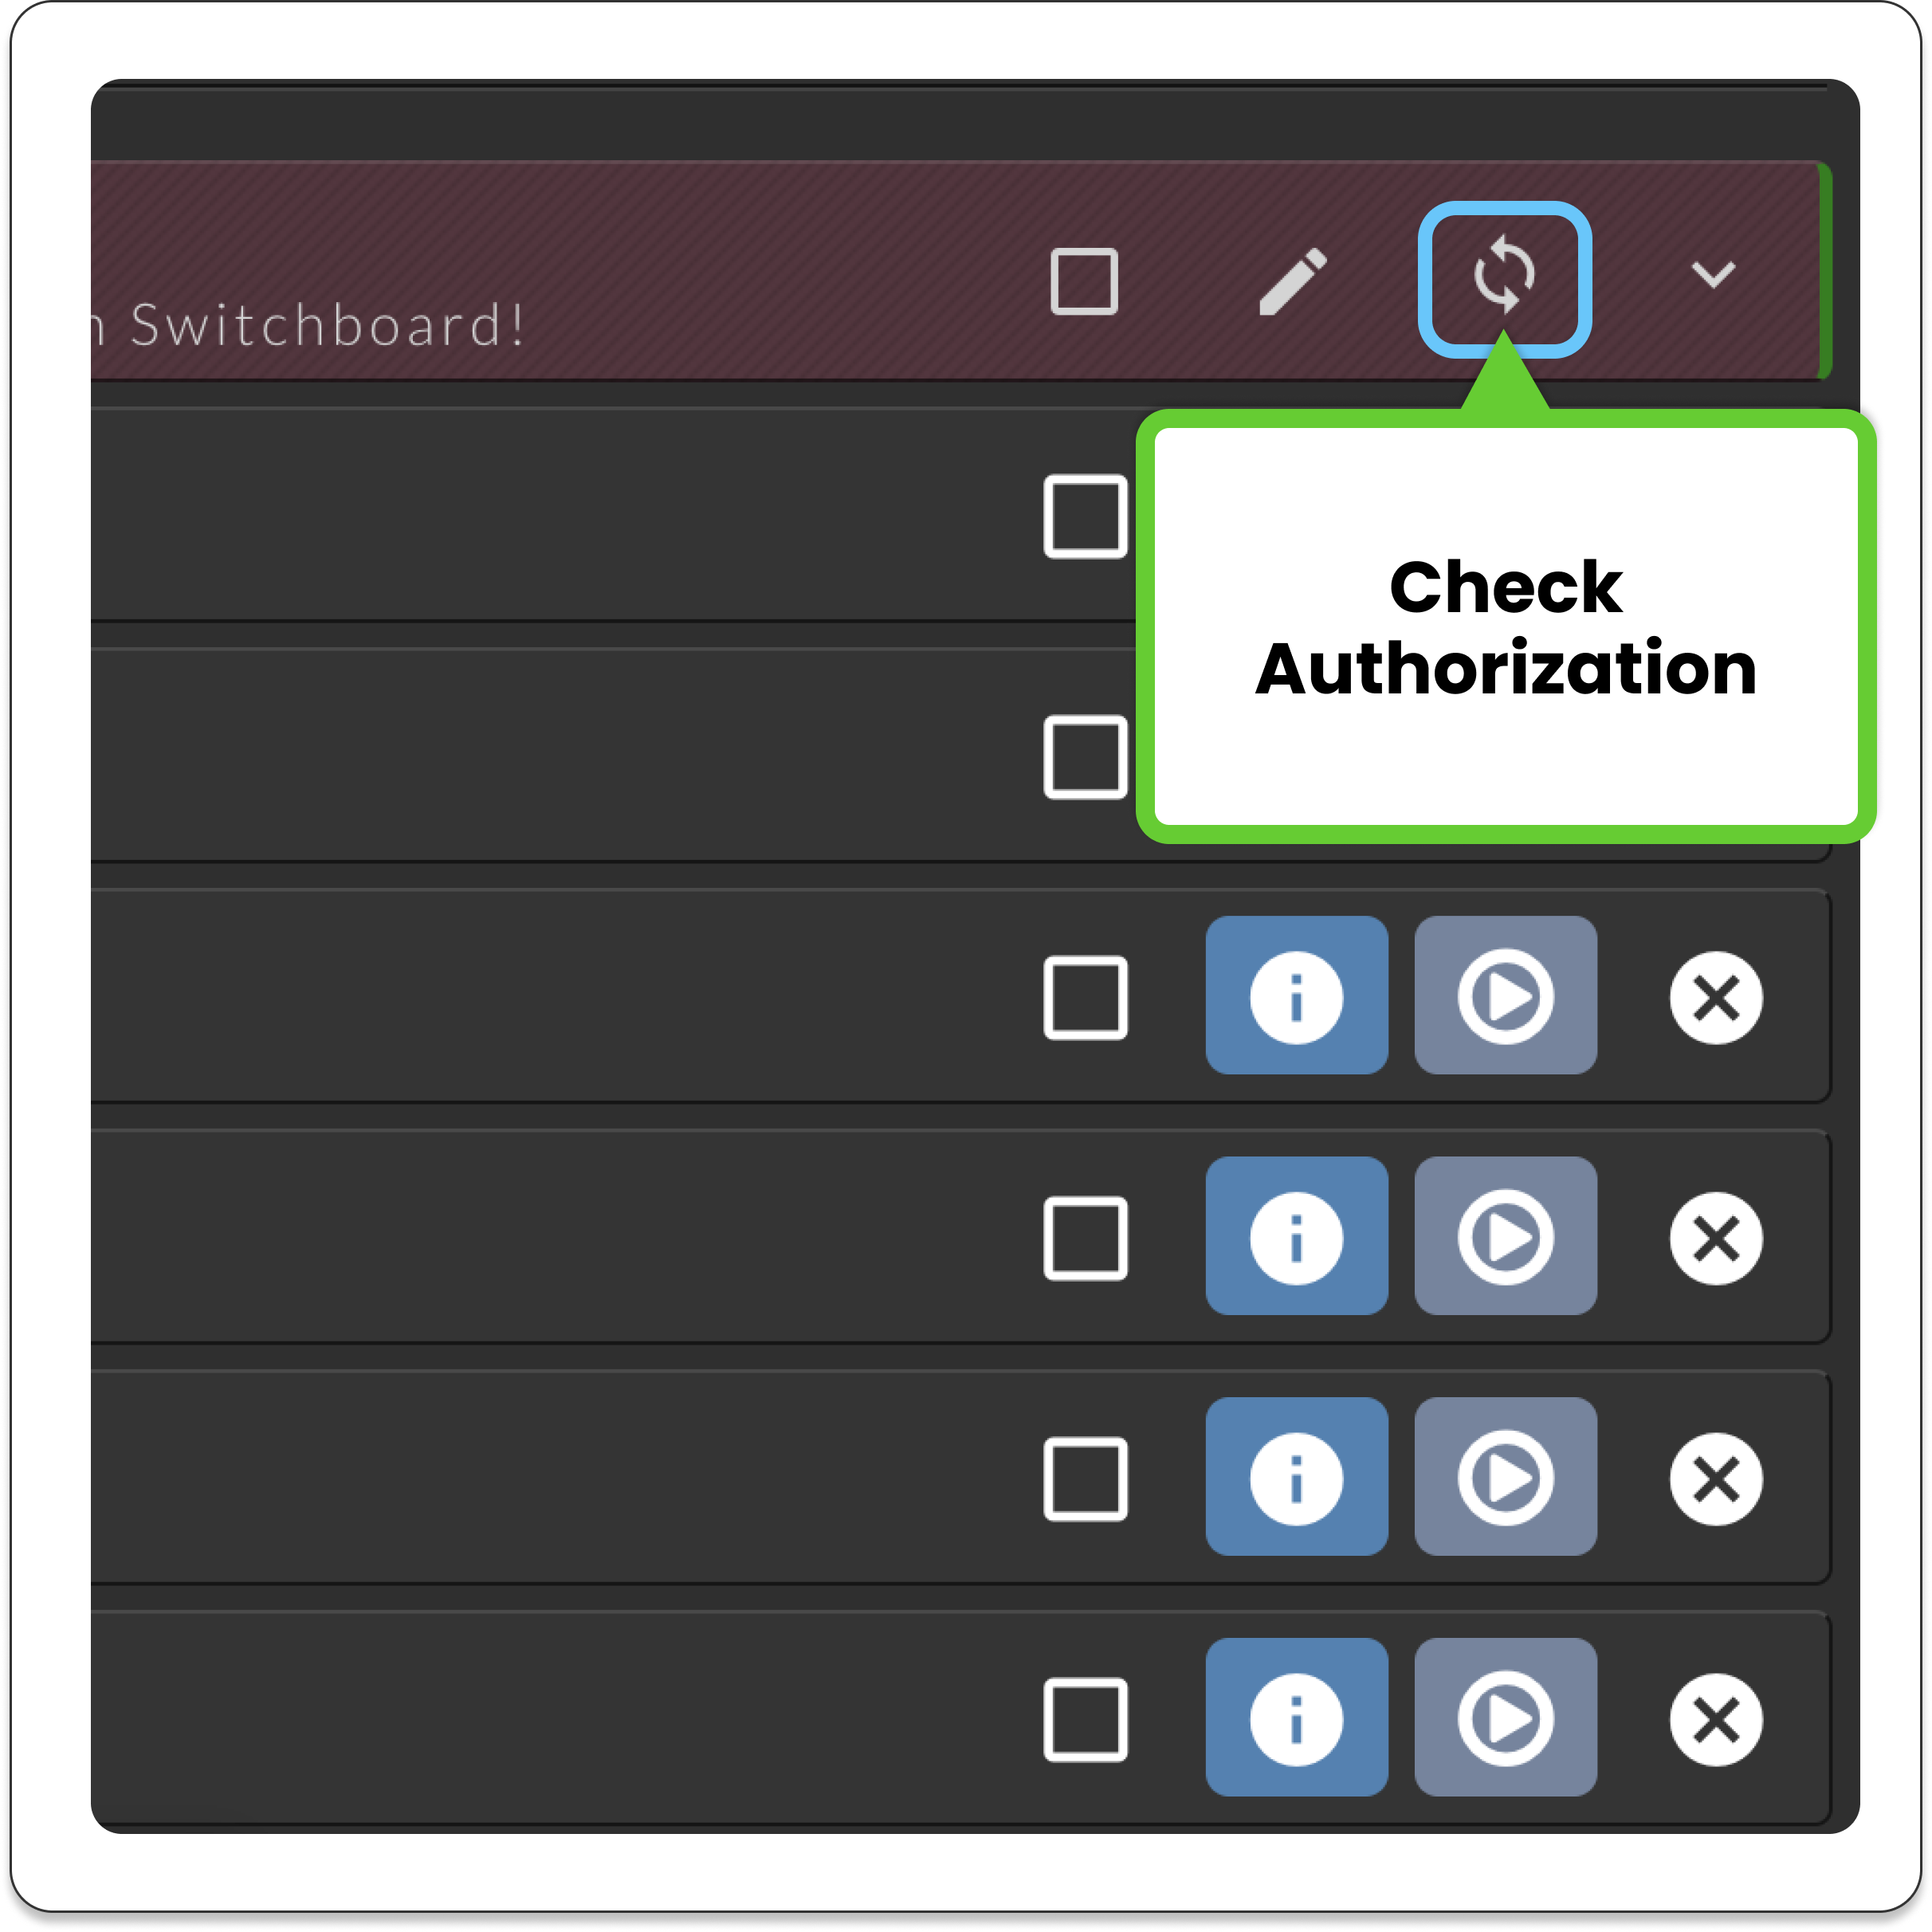 switchboardlive_workflow-page_destinations_pane_check-authorization.png